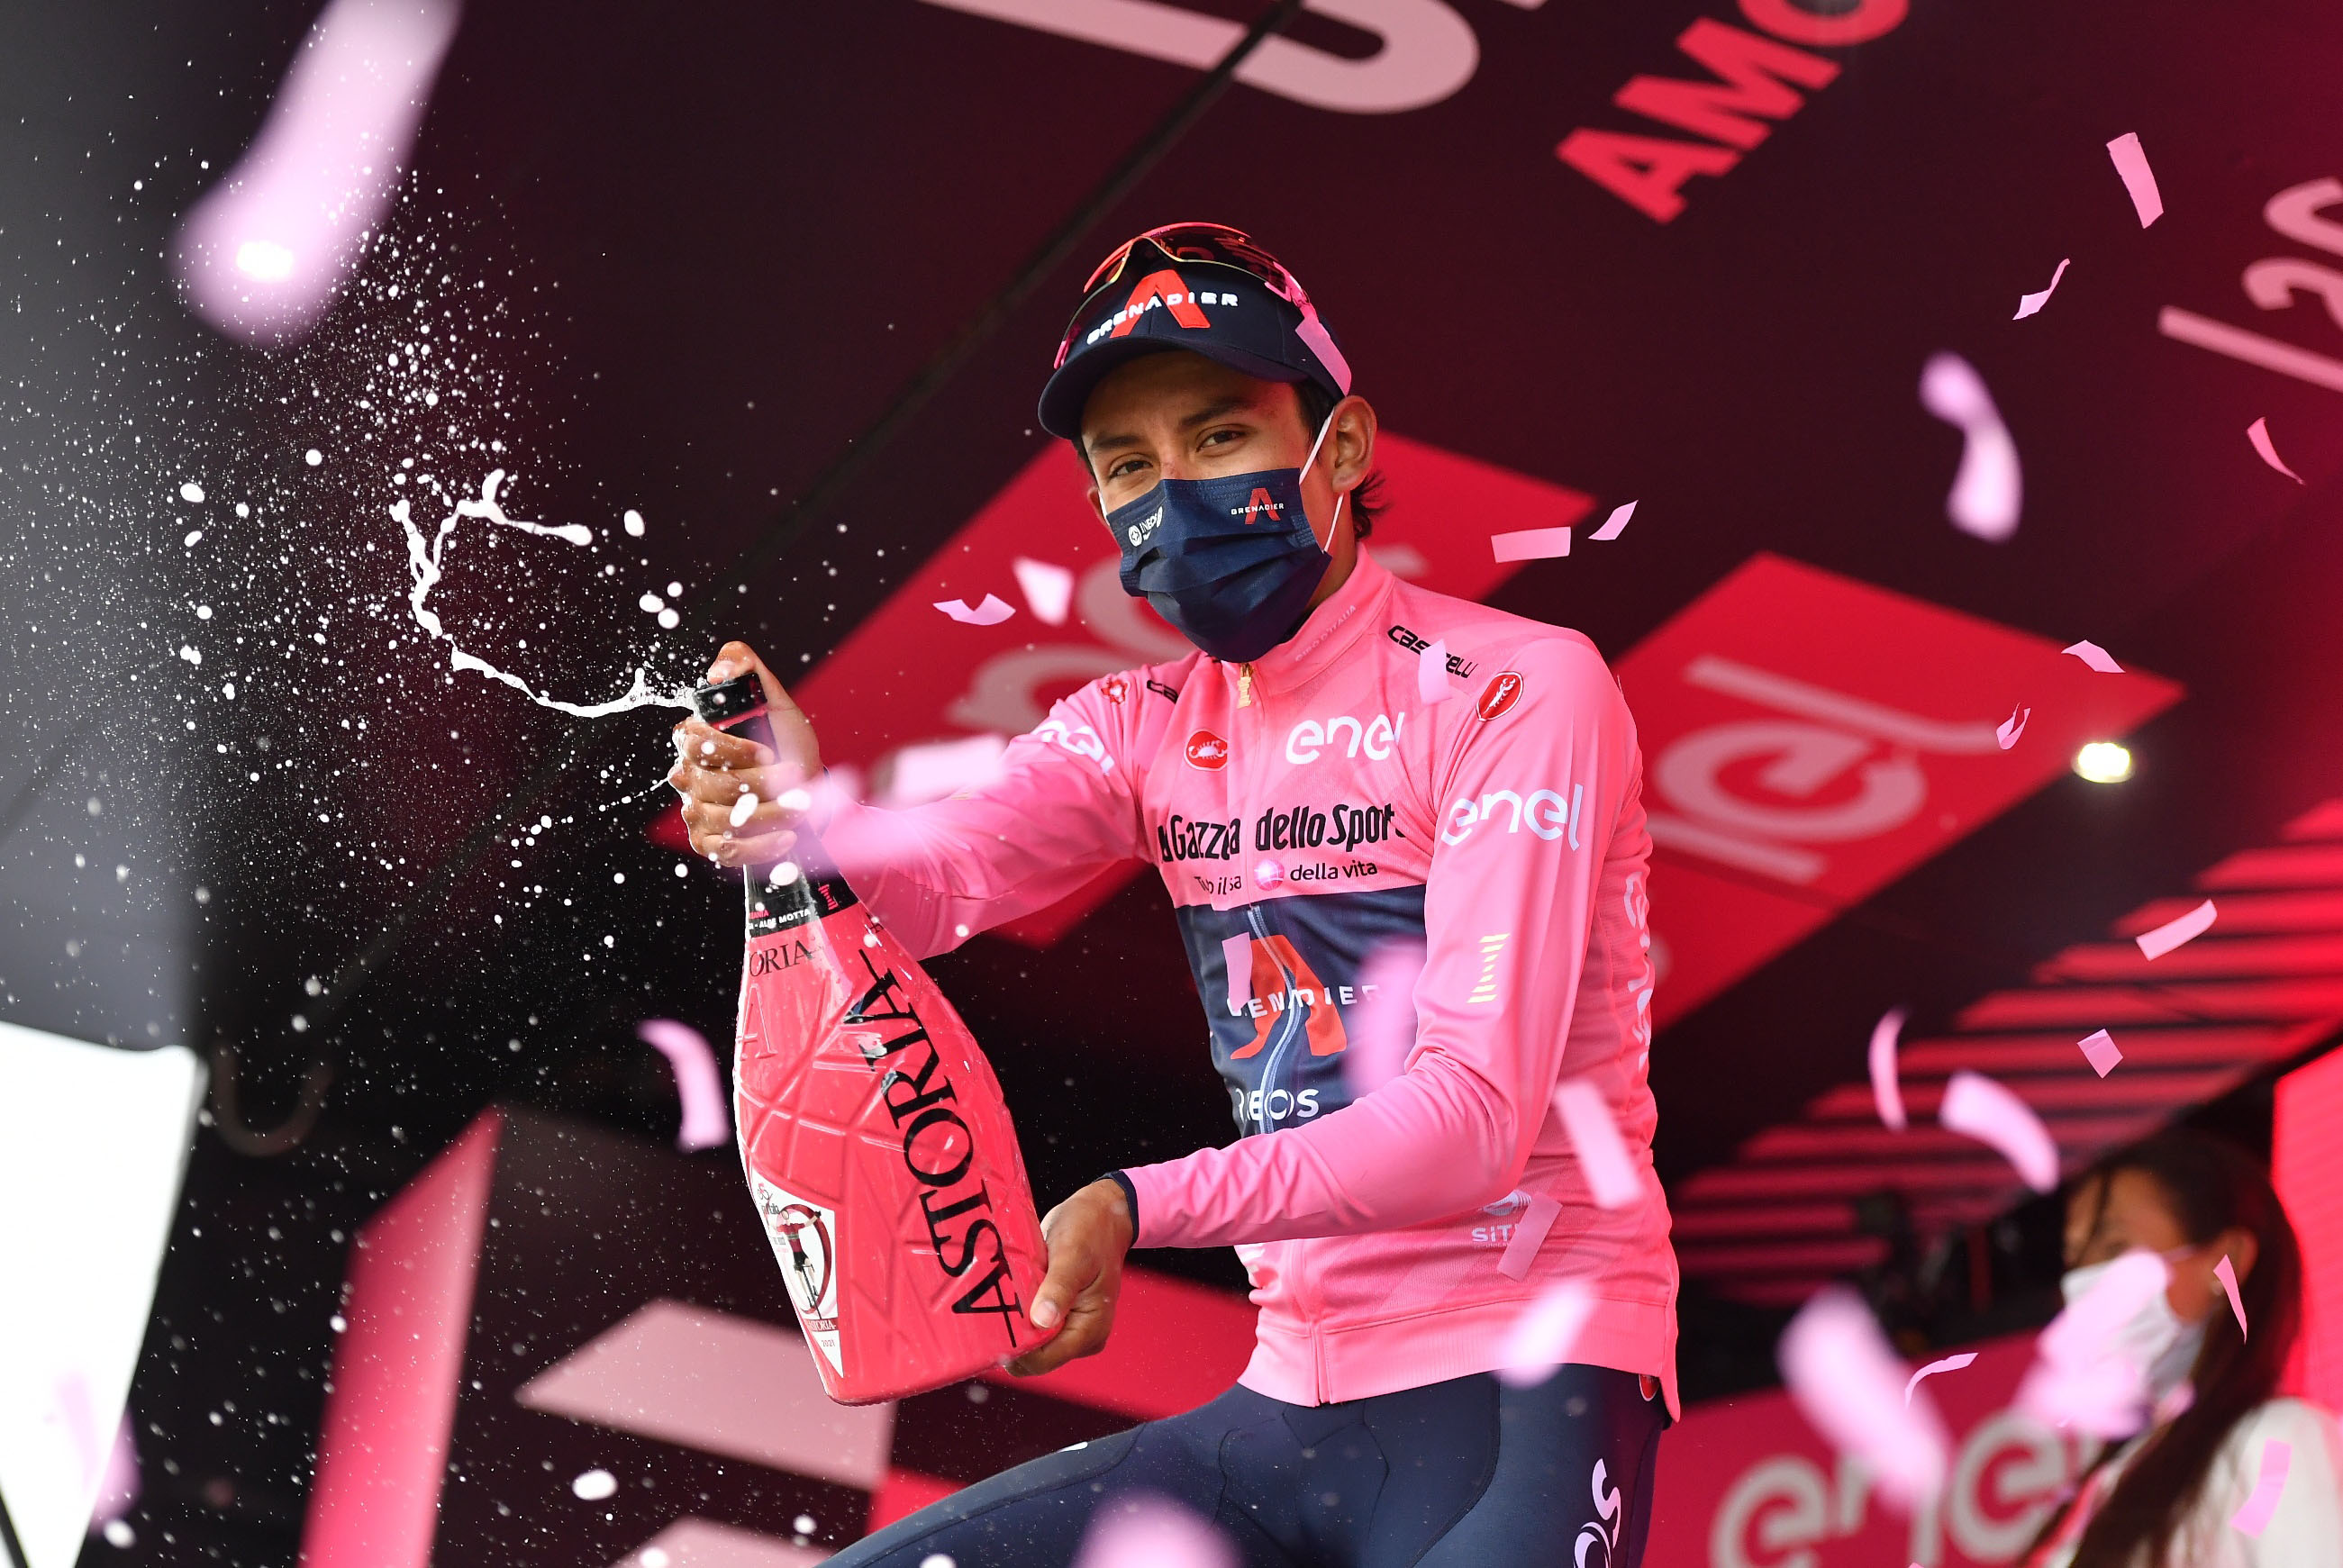 Cycling - Giro d'Italia - Stage 20 - Verbania to Valle Spluga-Alpe Motta, Italy - May 29, 2021 Ineos Grenadiers rider Egan Arley Bernal Gomez of Colombia celebrates wearing the maglia rosa with sparkling wine on the podium after stage 20 REUTERS/Jennifer Lorenzini